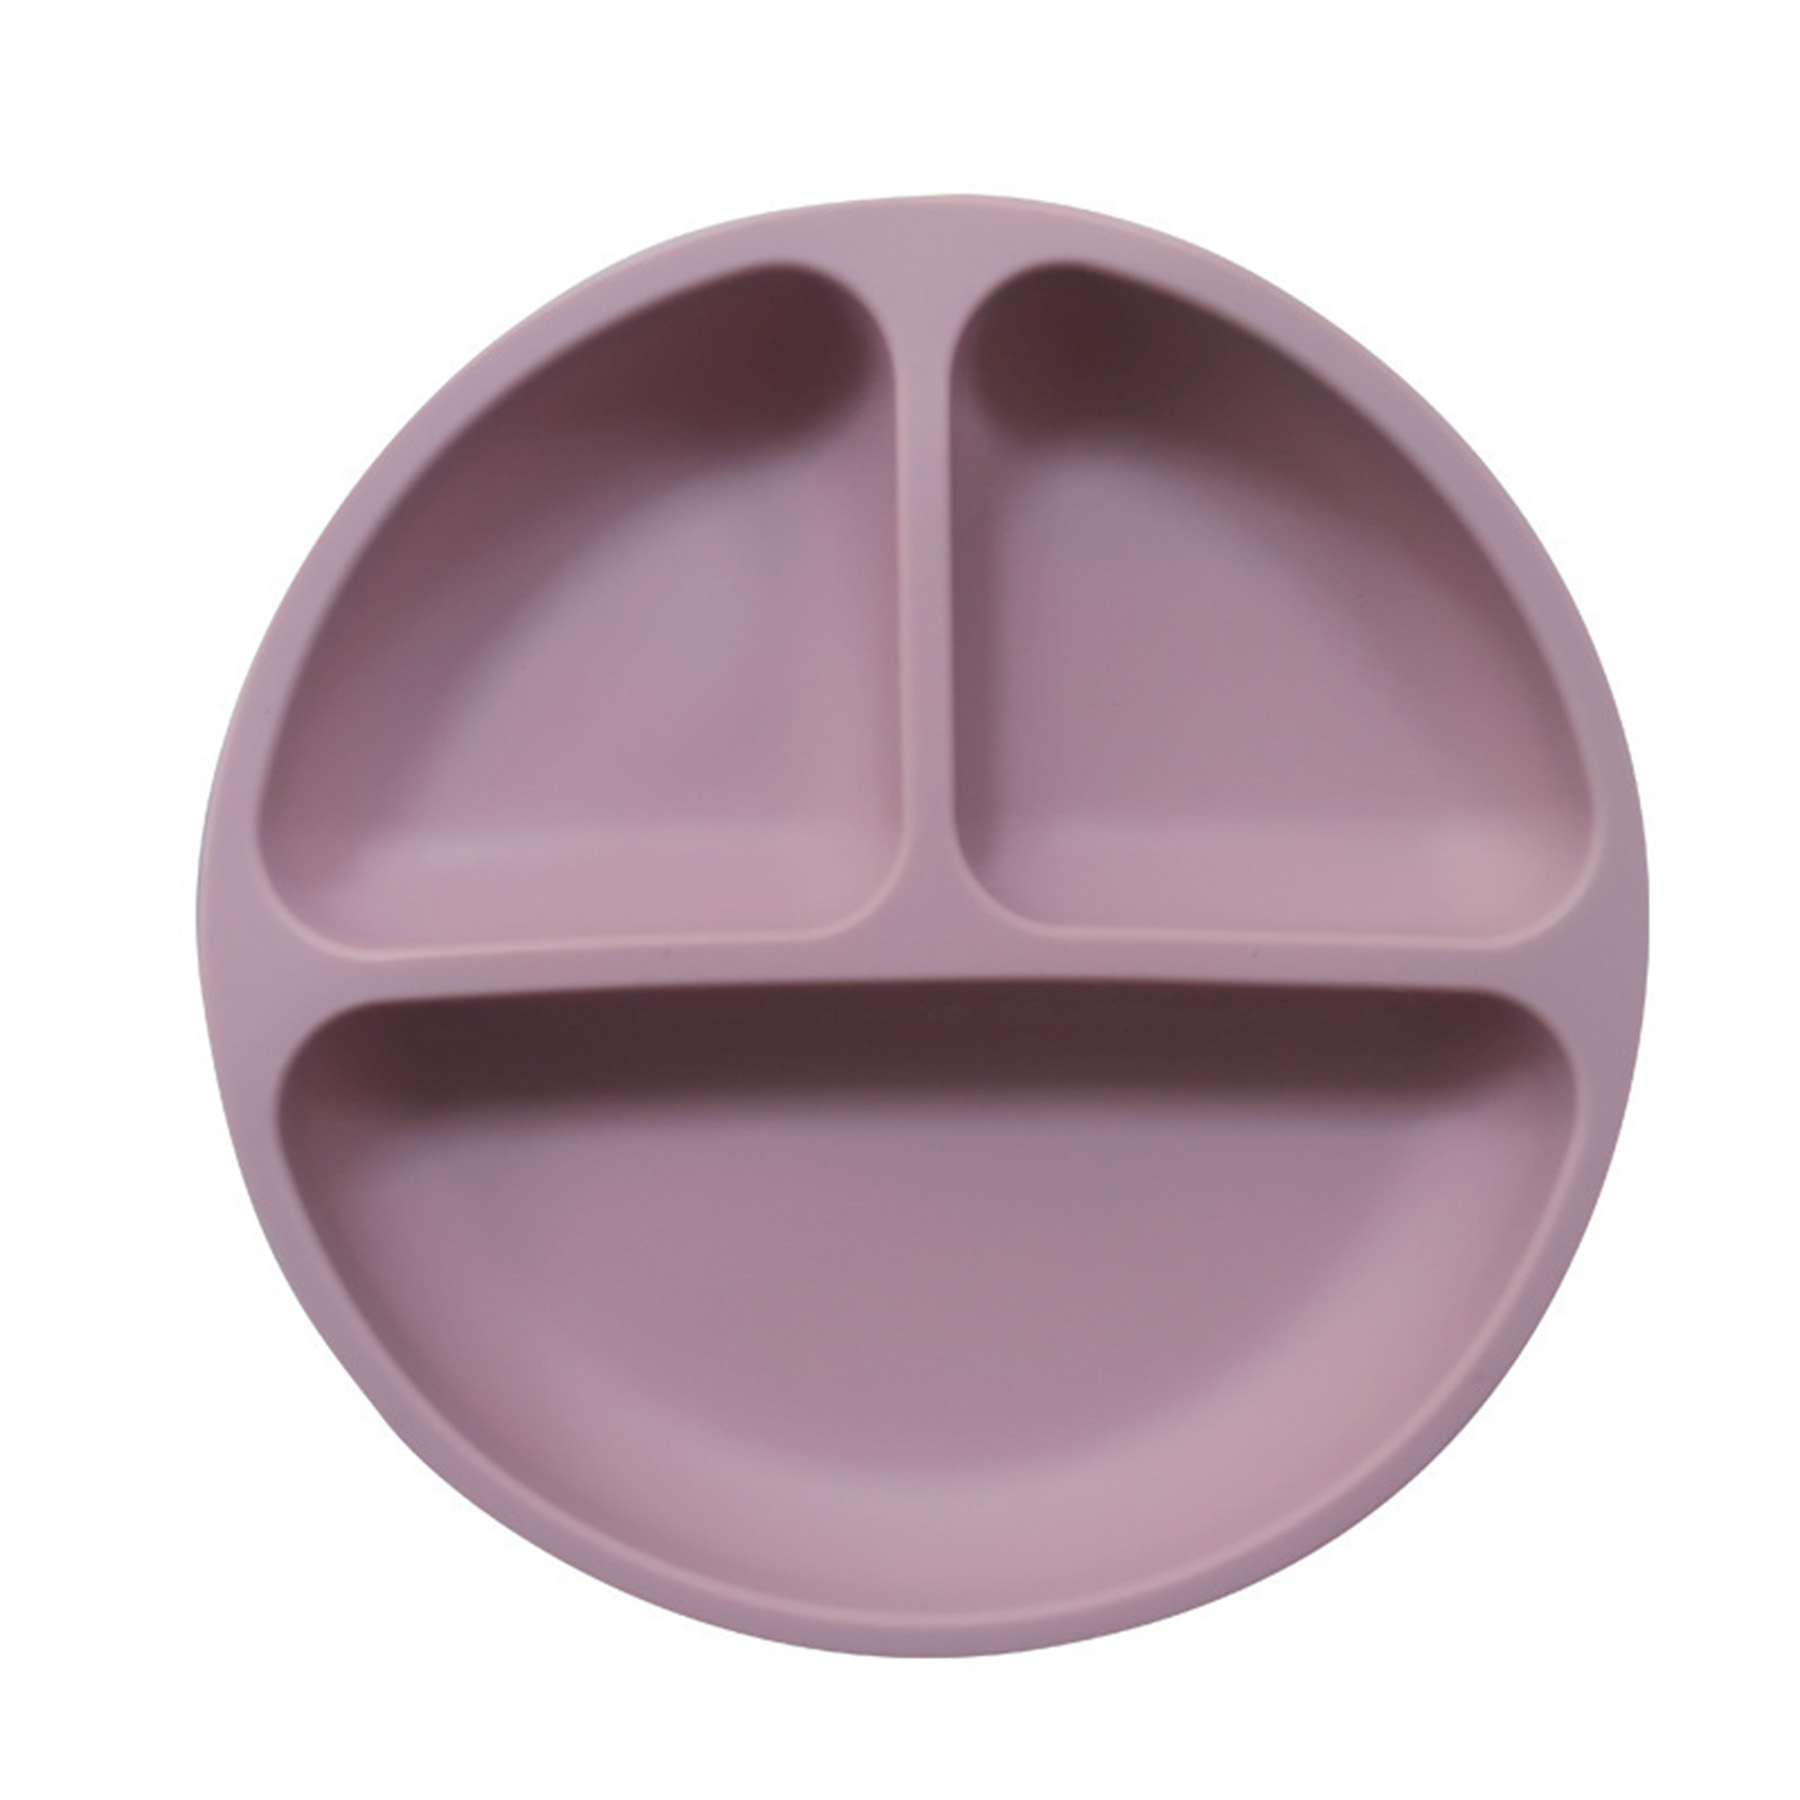 Suction Plates for Babies & Toddlers